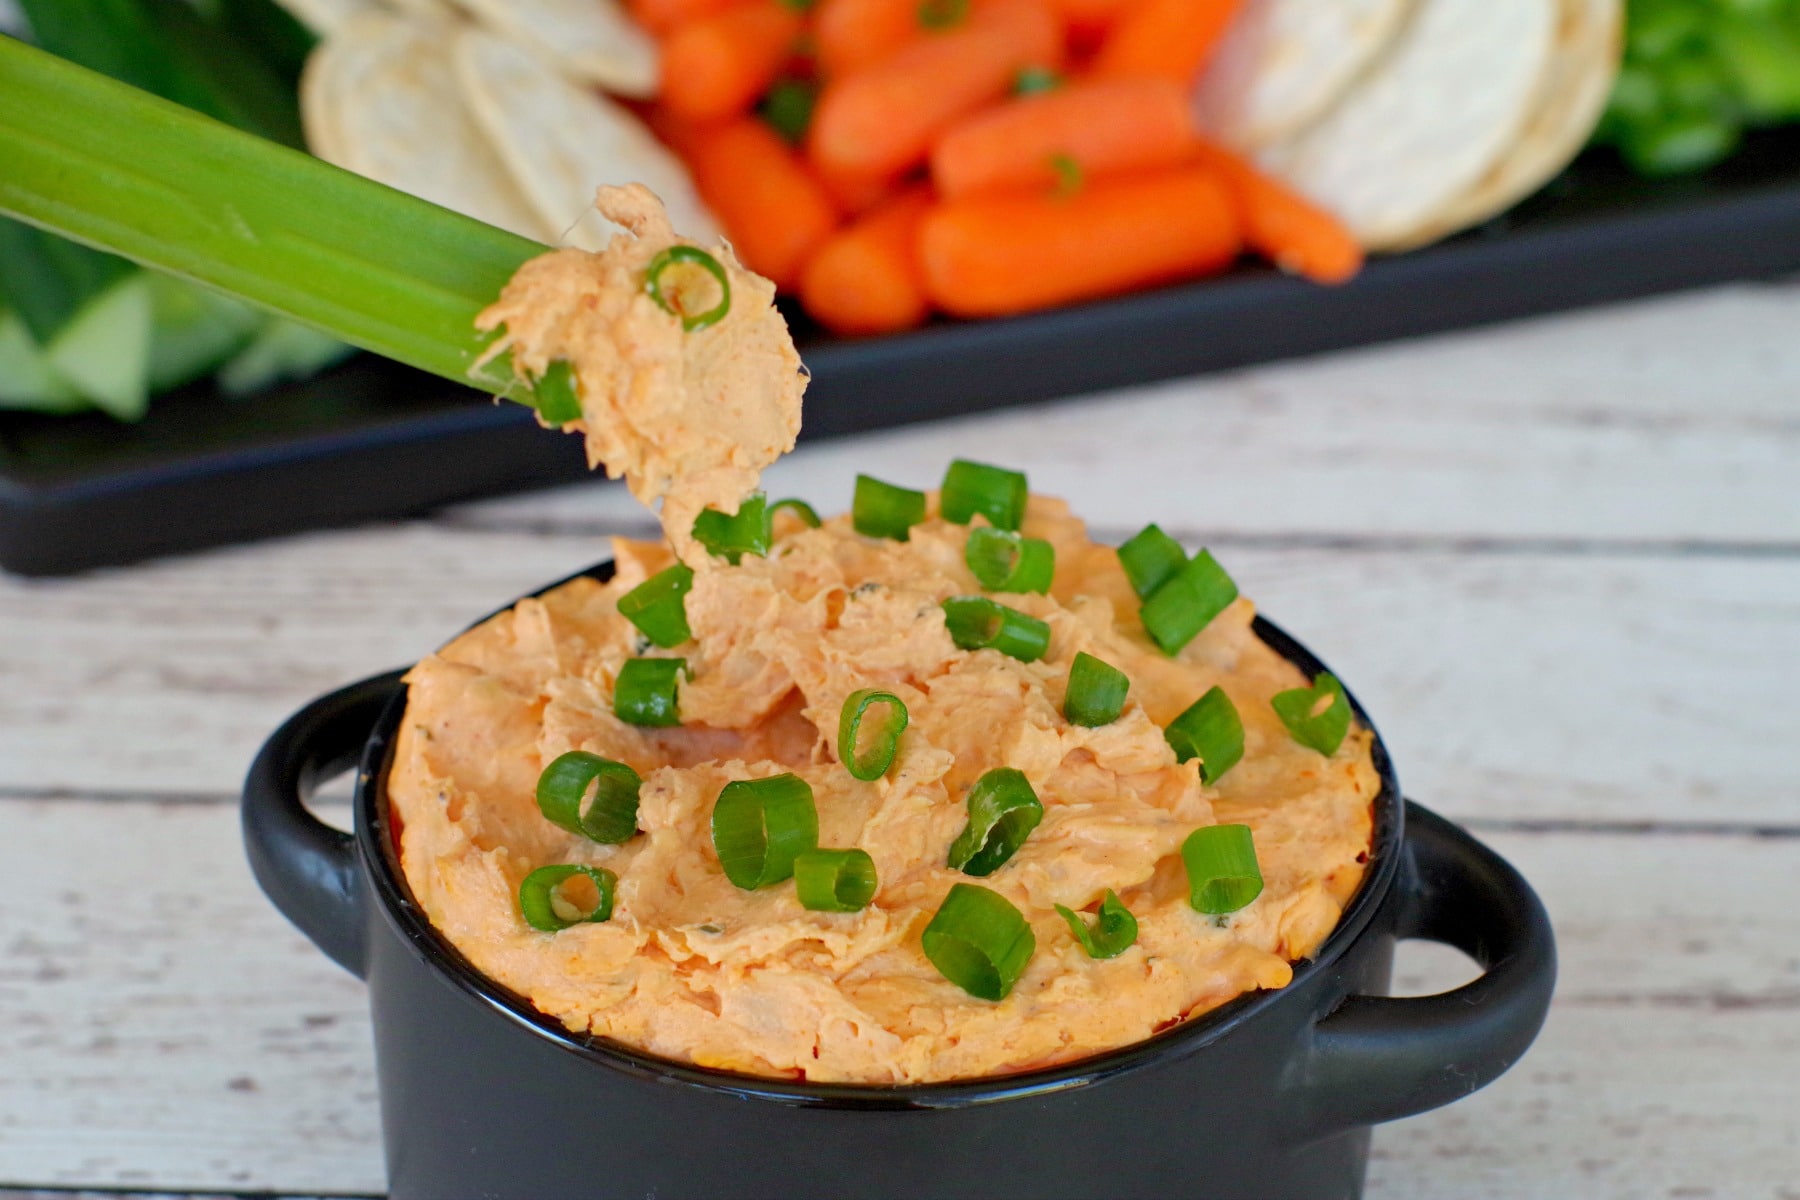 celery being dipped into buffalo chicken dip